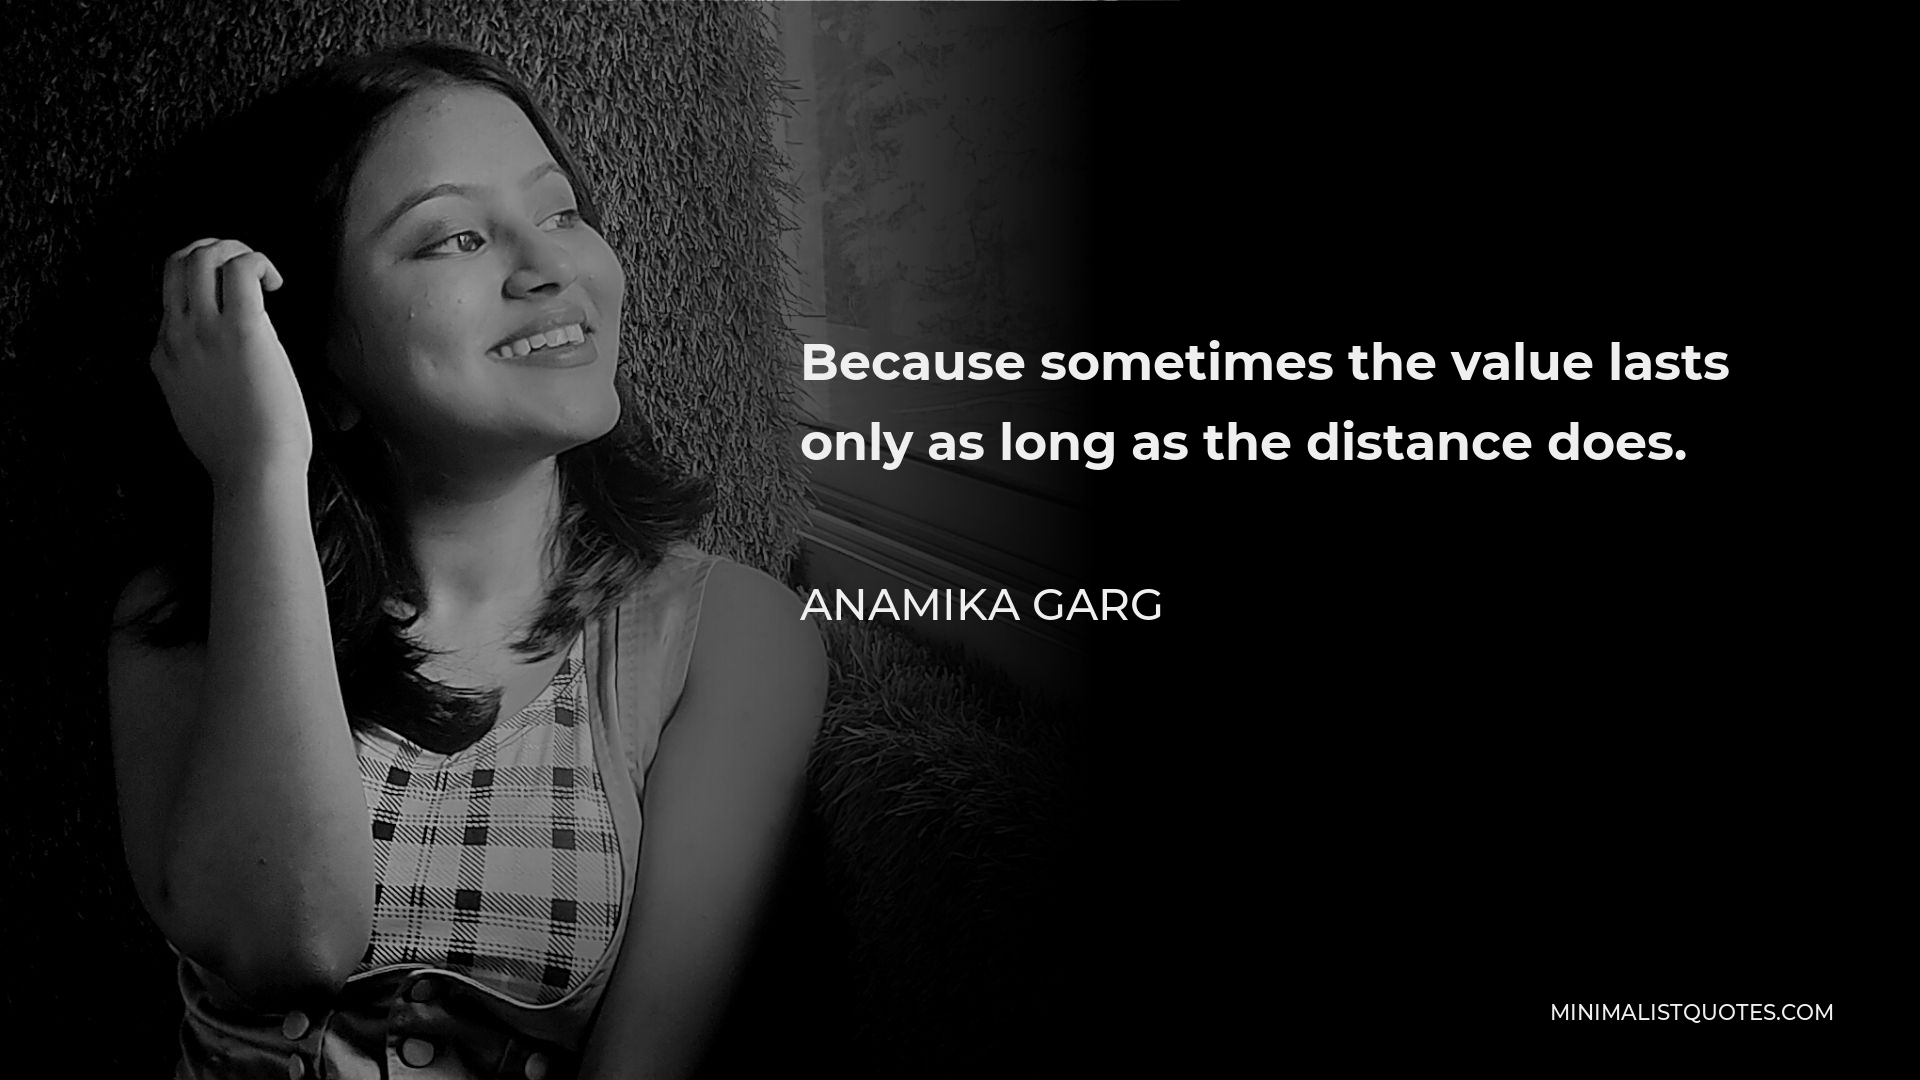 Anamika Garg Quote - Because sometimes the value lasts only as long as the distance does.